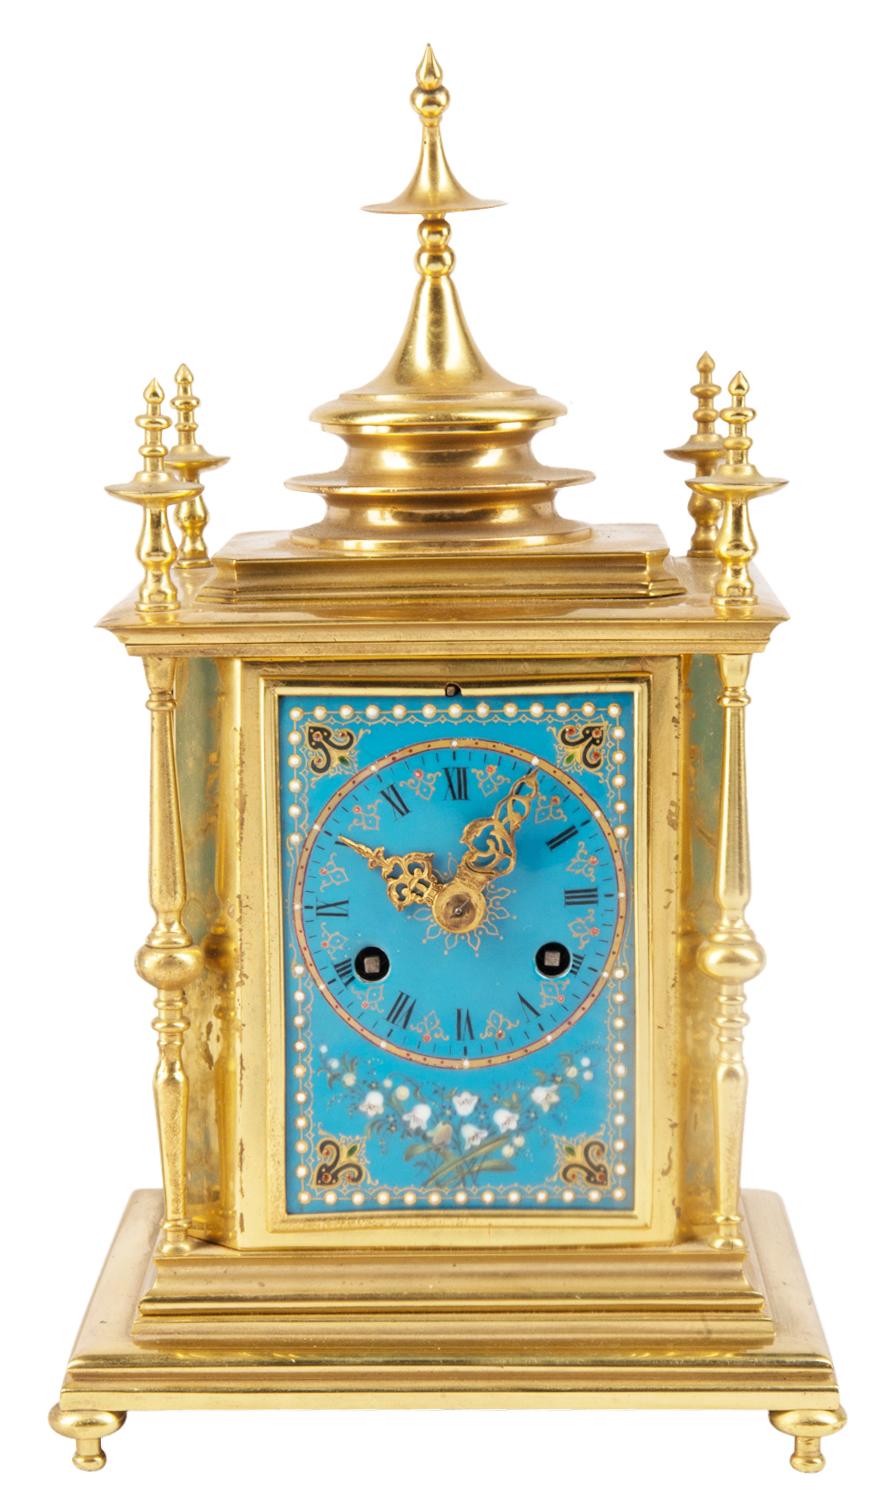 A fine quality 19th century French 'Sevres' style porcelain clock garniture. Having a pair of ormolu mounted lidded urns each with Rams head handles, white bead and floral painted decoration. The clock with three porcelain panels, an eight day